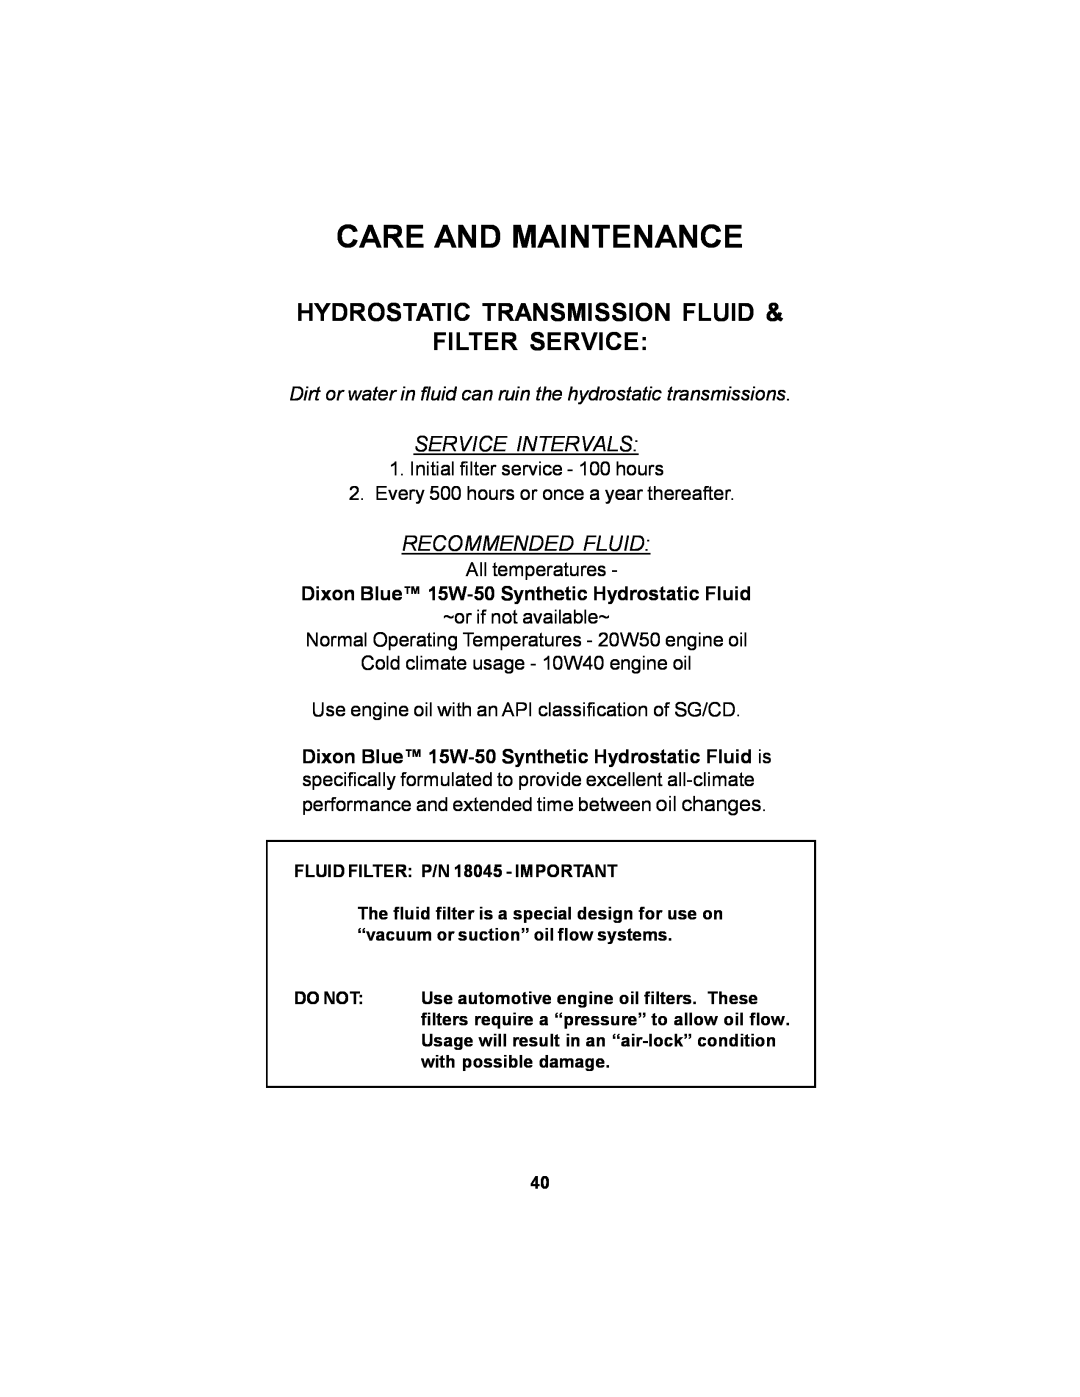 Dixon 18626-106 Hydrostatic Transmission Fluid Filter Service, Care And Maintenance, Service Intervals, Recommended Fluid 